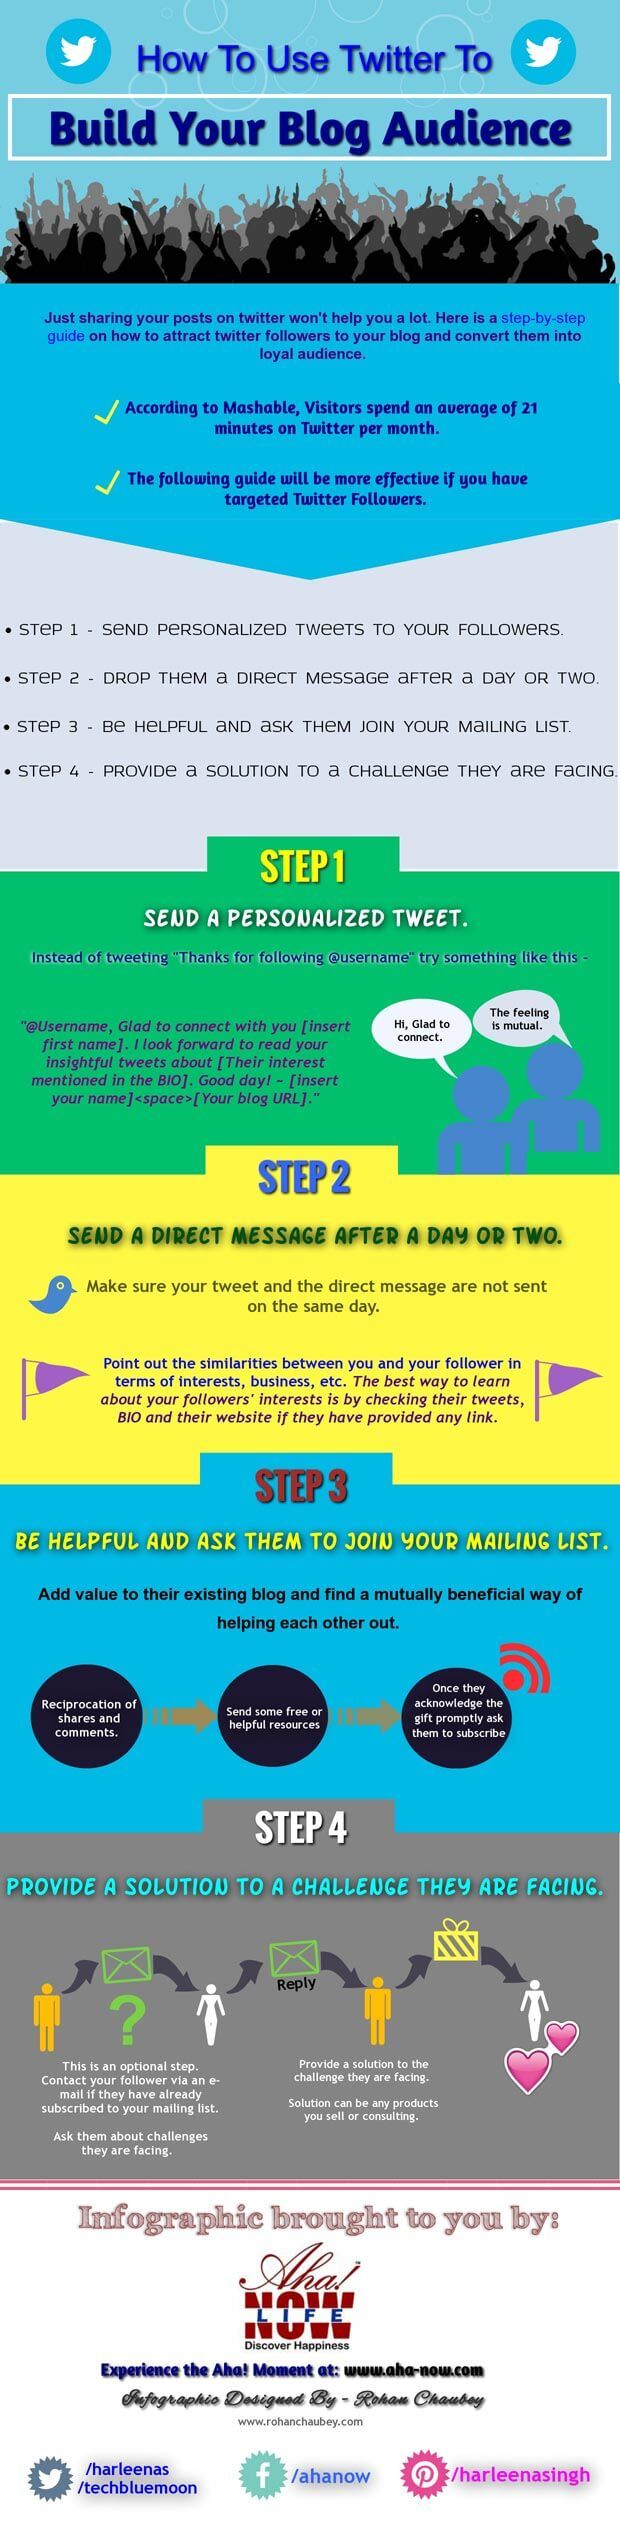 infographic of how to use Twitter to build a blog audience